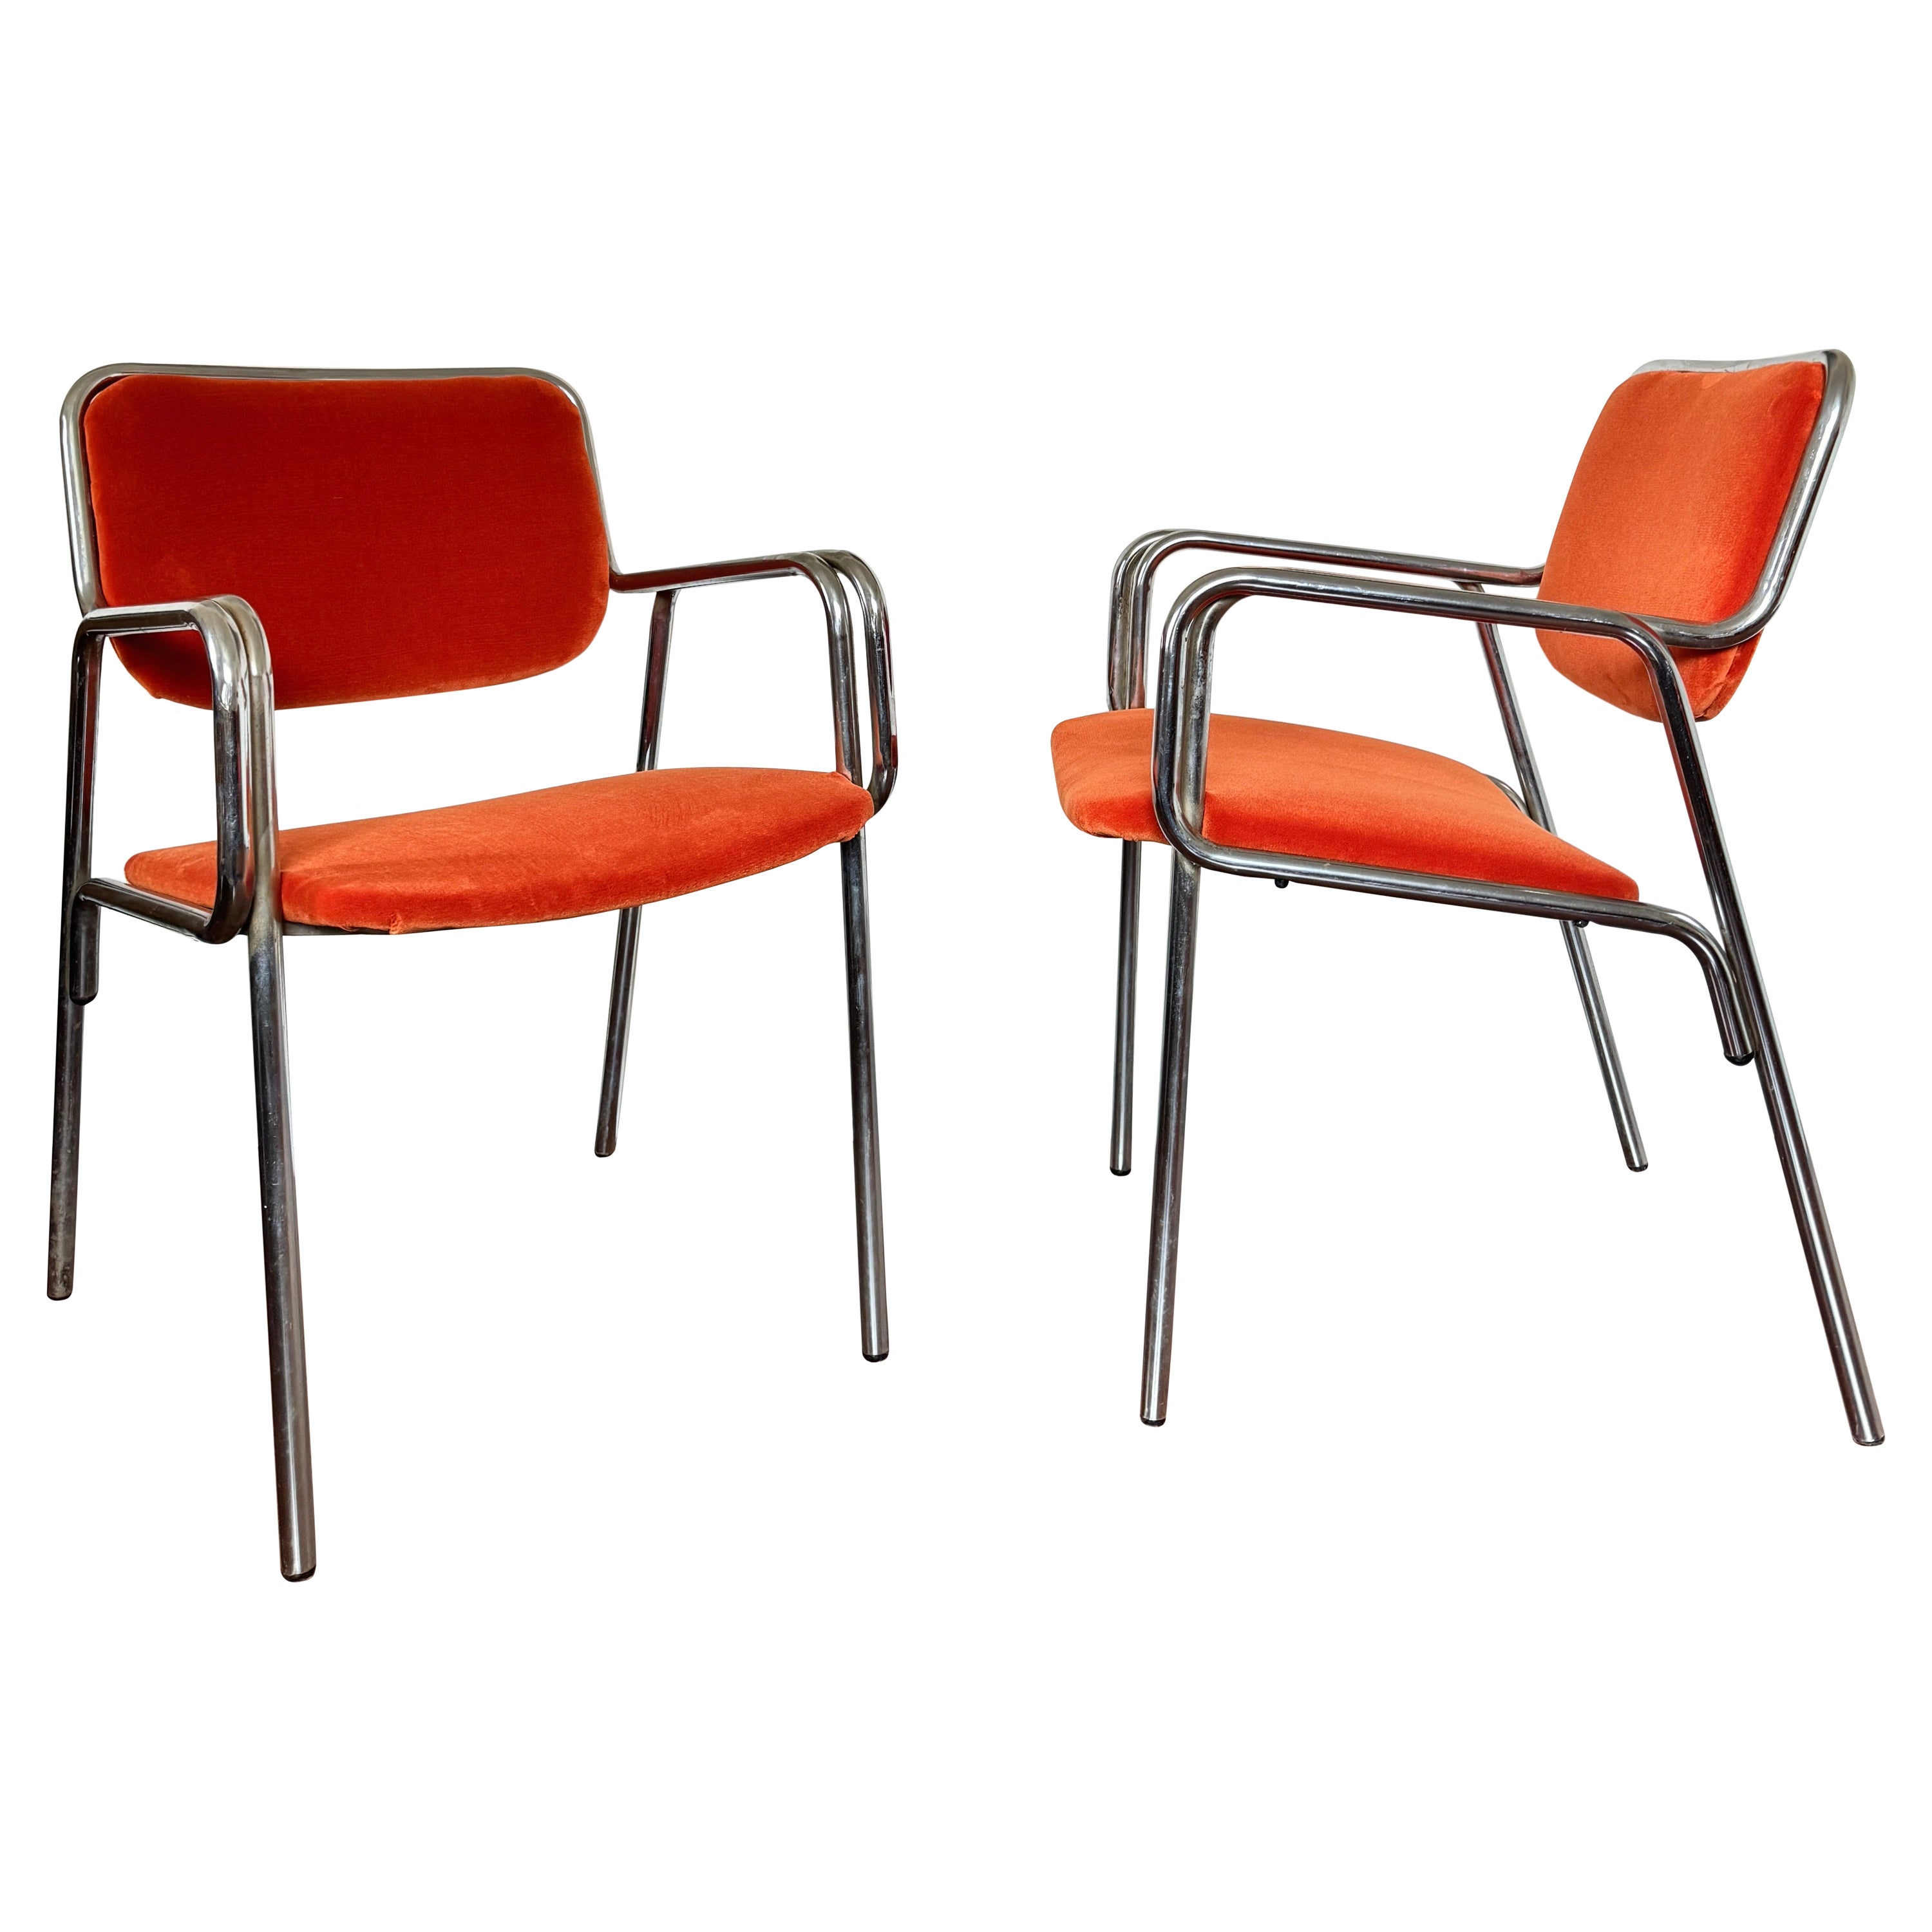 A set of mid century modern tubular arm chairs by Global Upholstery Company For Sale